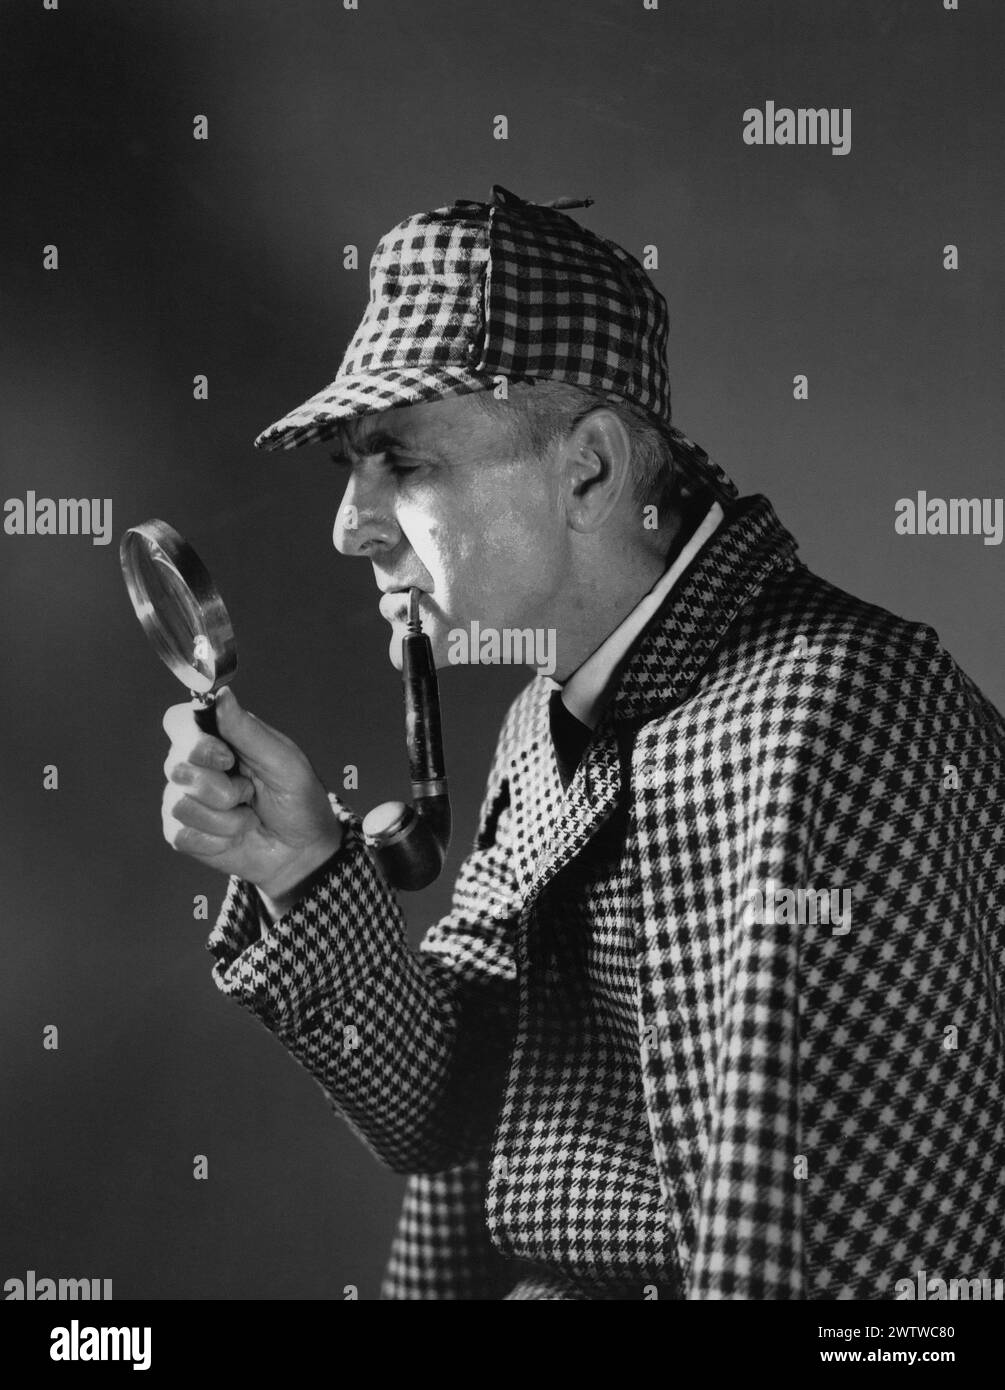 Older man in a Sherlock Holmes type matching outfit and hat with a hand and a magnifying glass up to his face with a large pipe hanging out of his mouth Stock Photo